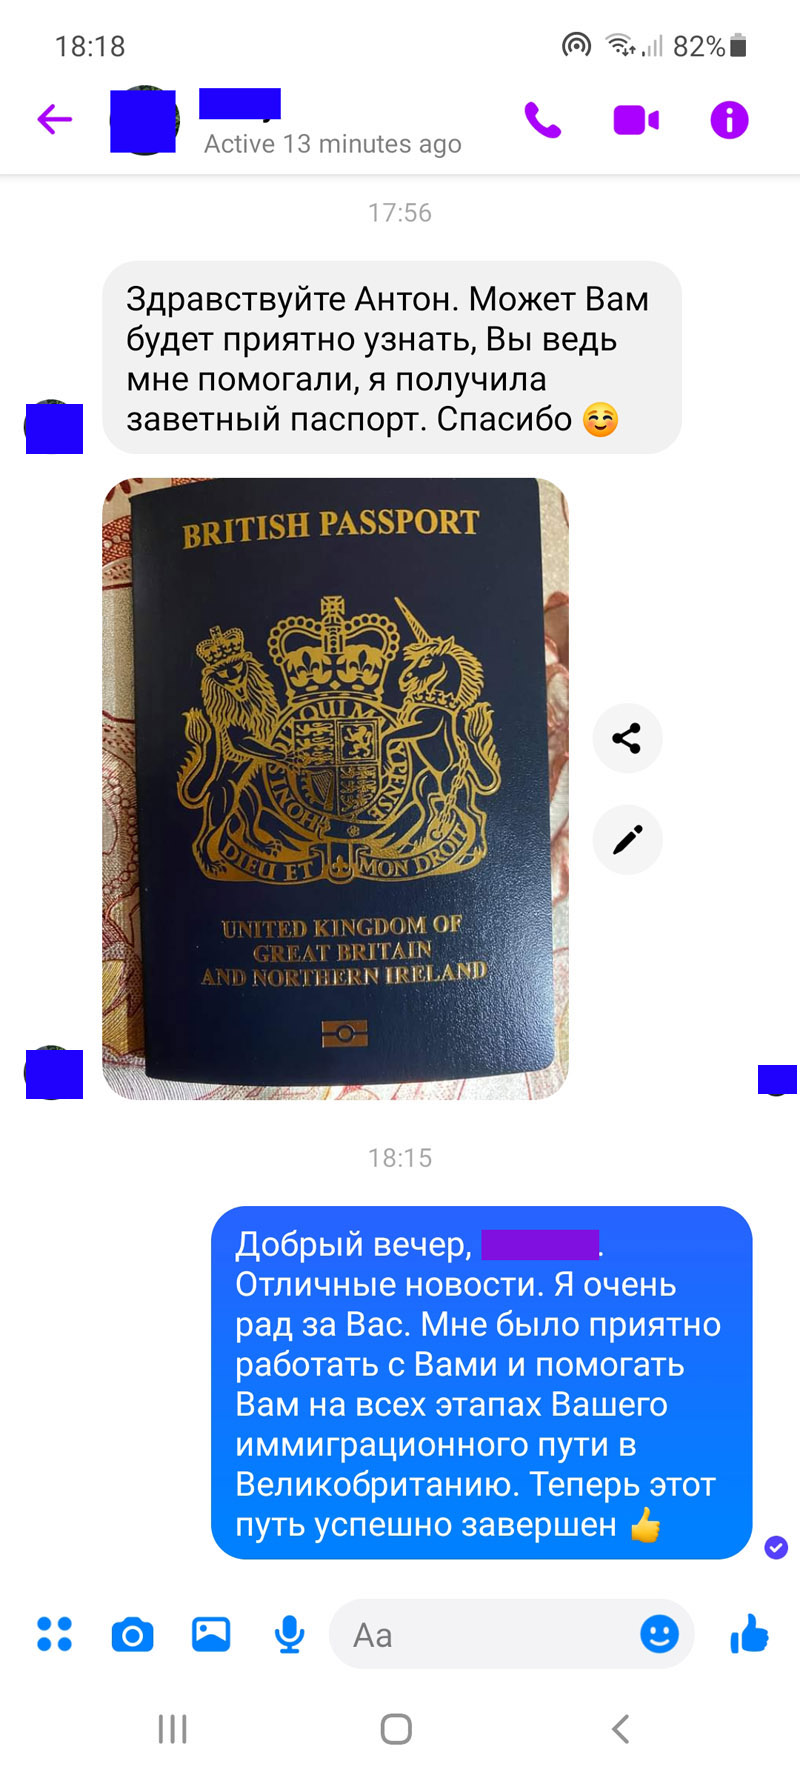 UK_passport_issued_to_a_client_from_Ukra